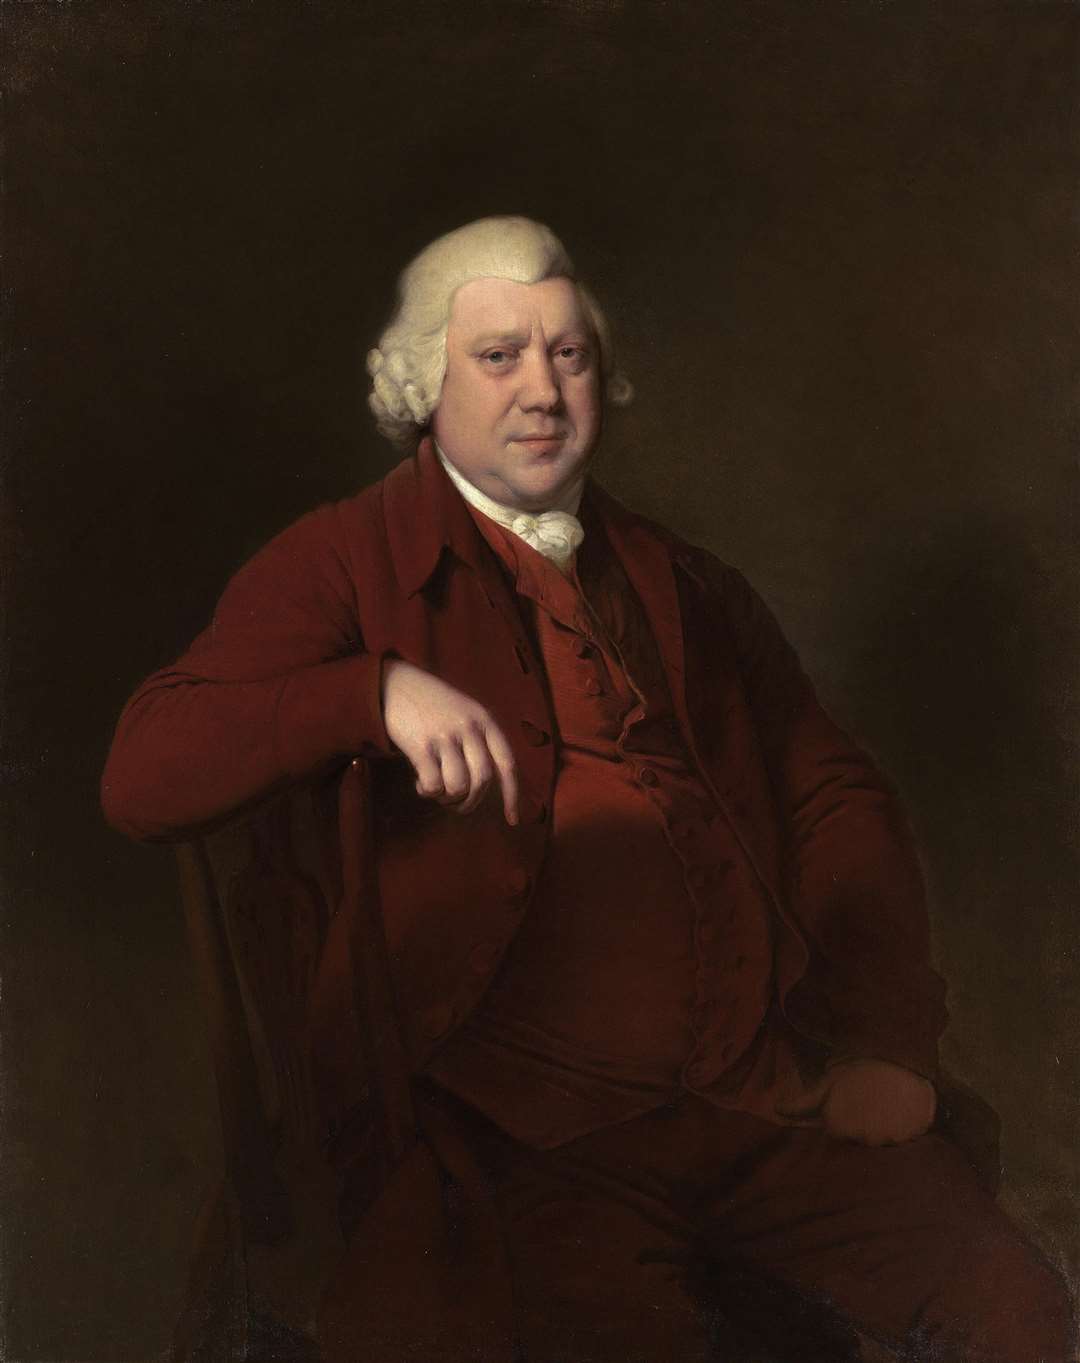 A portrait of the British engineer and inventor Sir Richard Arkwright by Joseph Wright of Derby (National Portrait Gallery/PA)